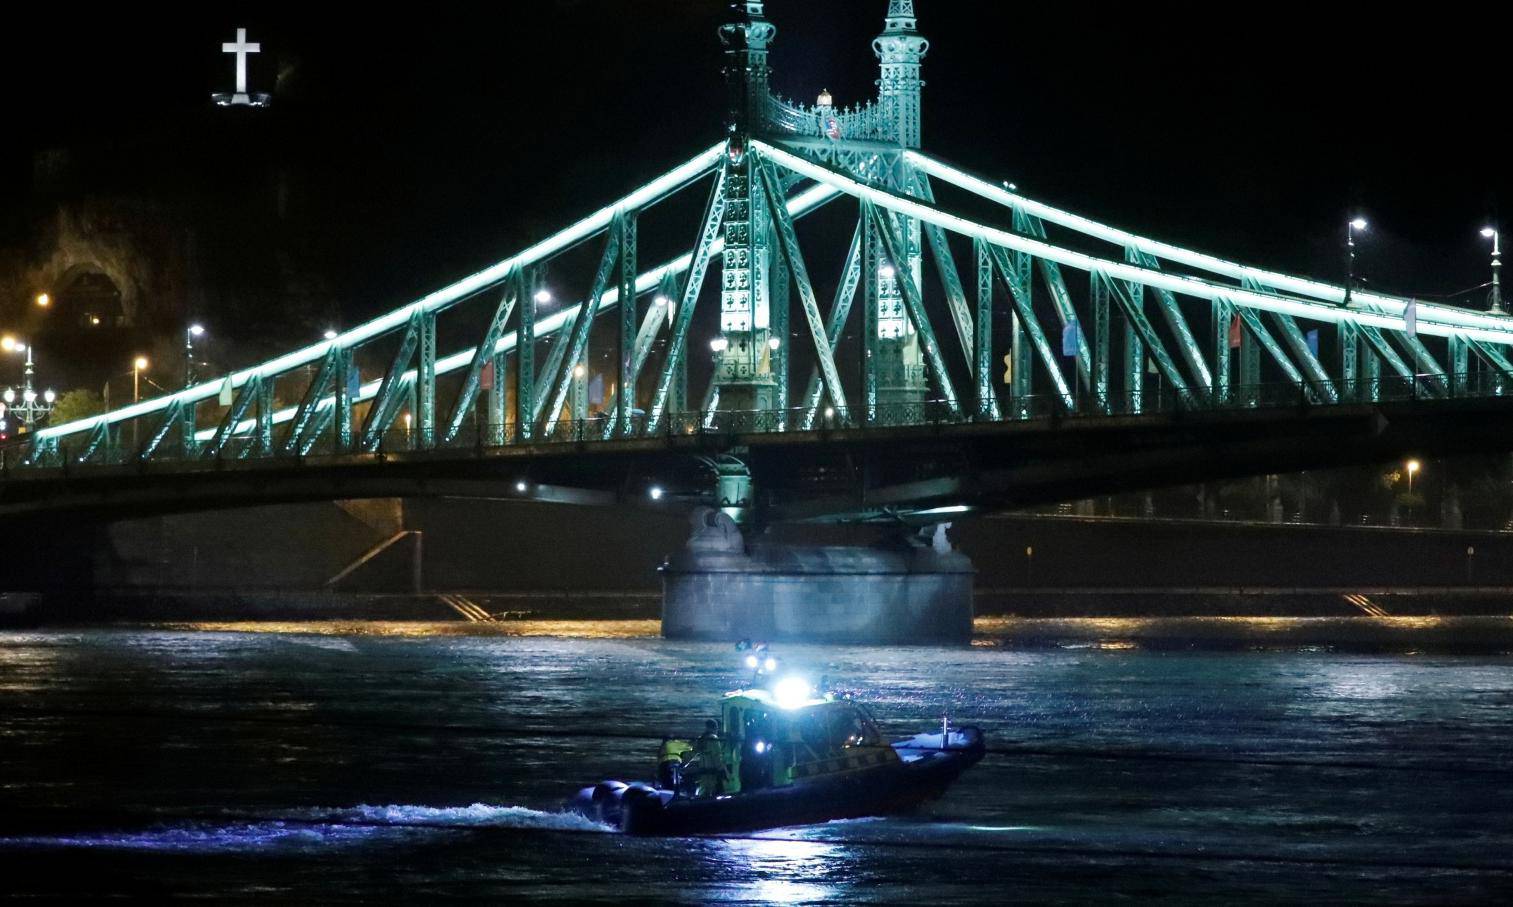 A rescue boat is seen on the Danube river after a tourist boat capsizedÂ in Budapest